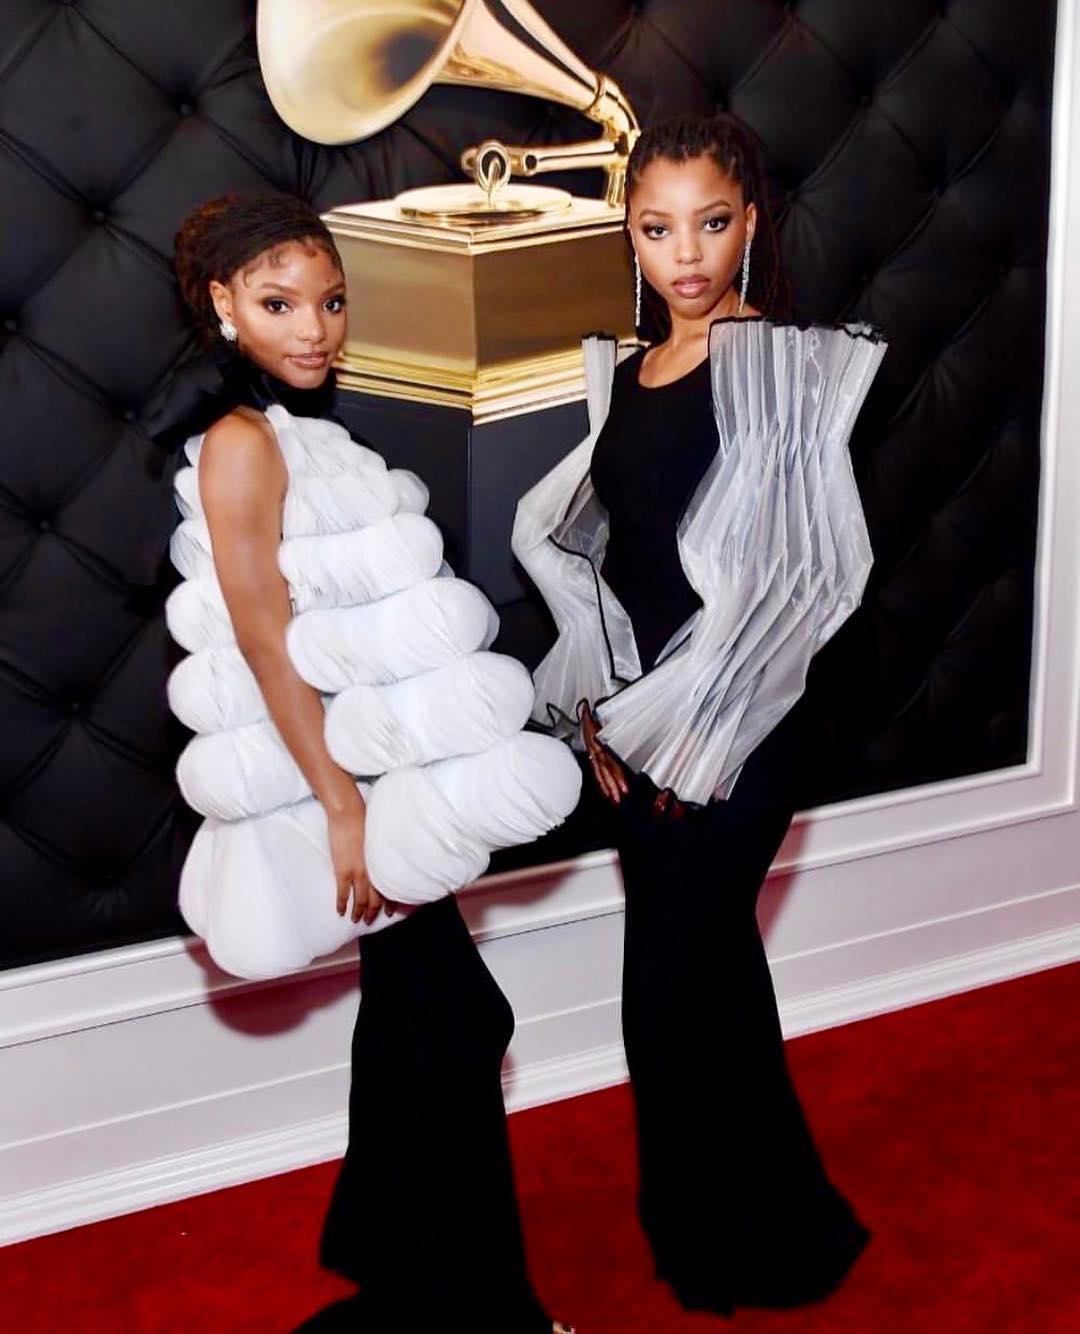 Chloe x Halle Are A Dynamic Style Duo